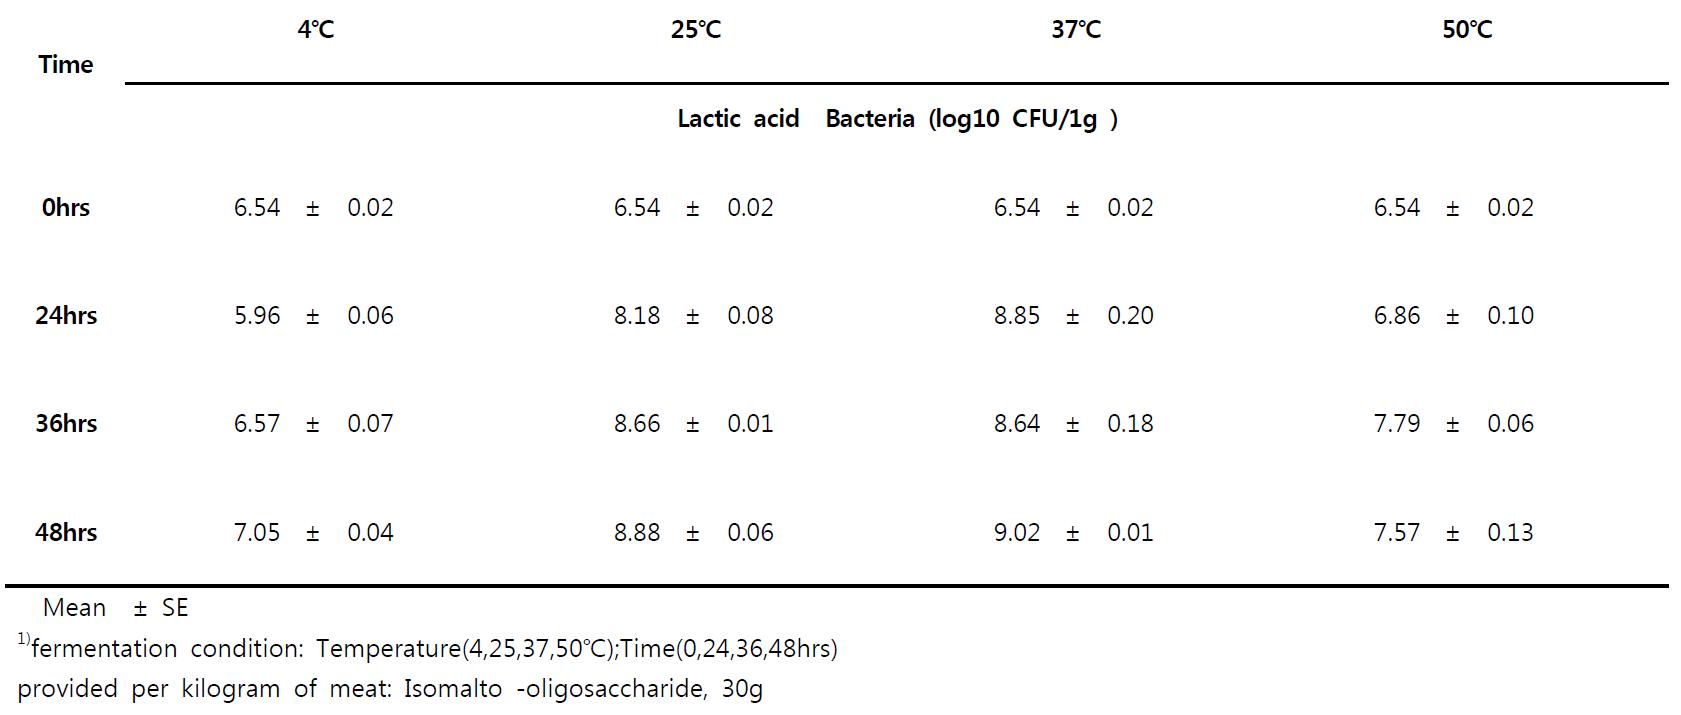 Effect of caused by fermentaion temperature and fermentaion time changes on bacterial composition in fermentedmeat1)